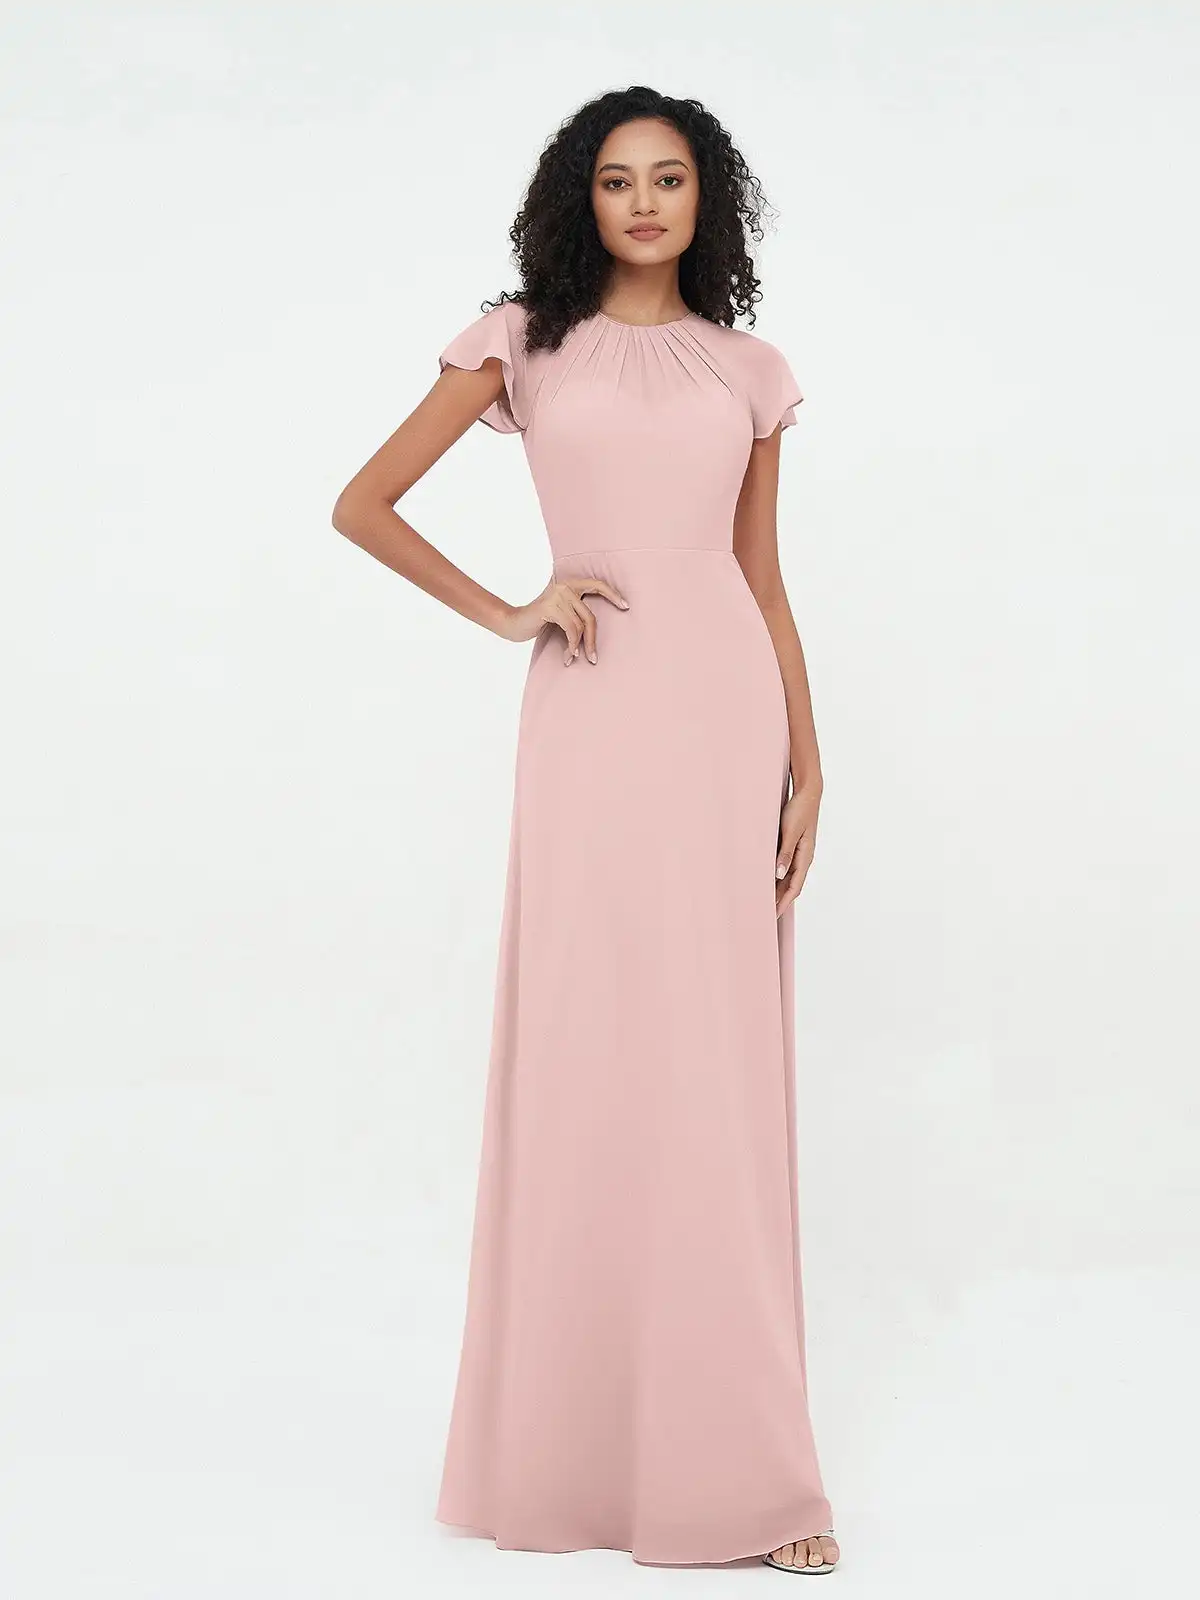 

Illusion Neckline Chiffon Bridesmaid Dress With Cap Sleeves A-line Wedding Cocktail Dresses Pleated Floor-length Evening Gowns